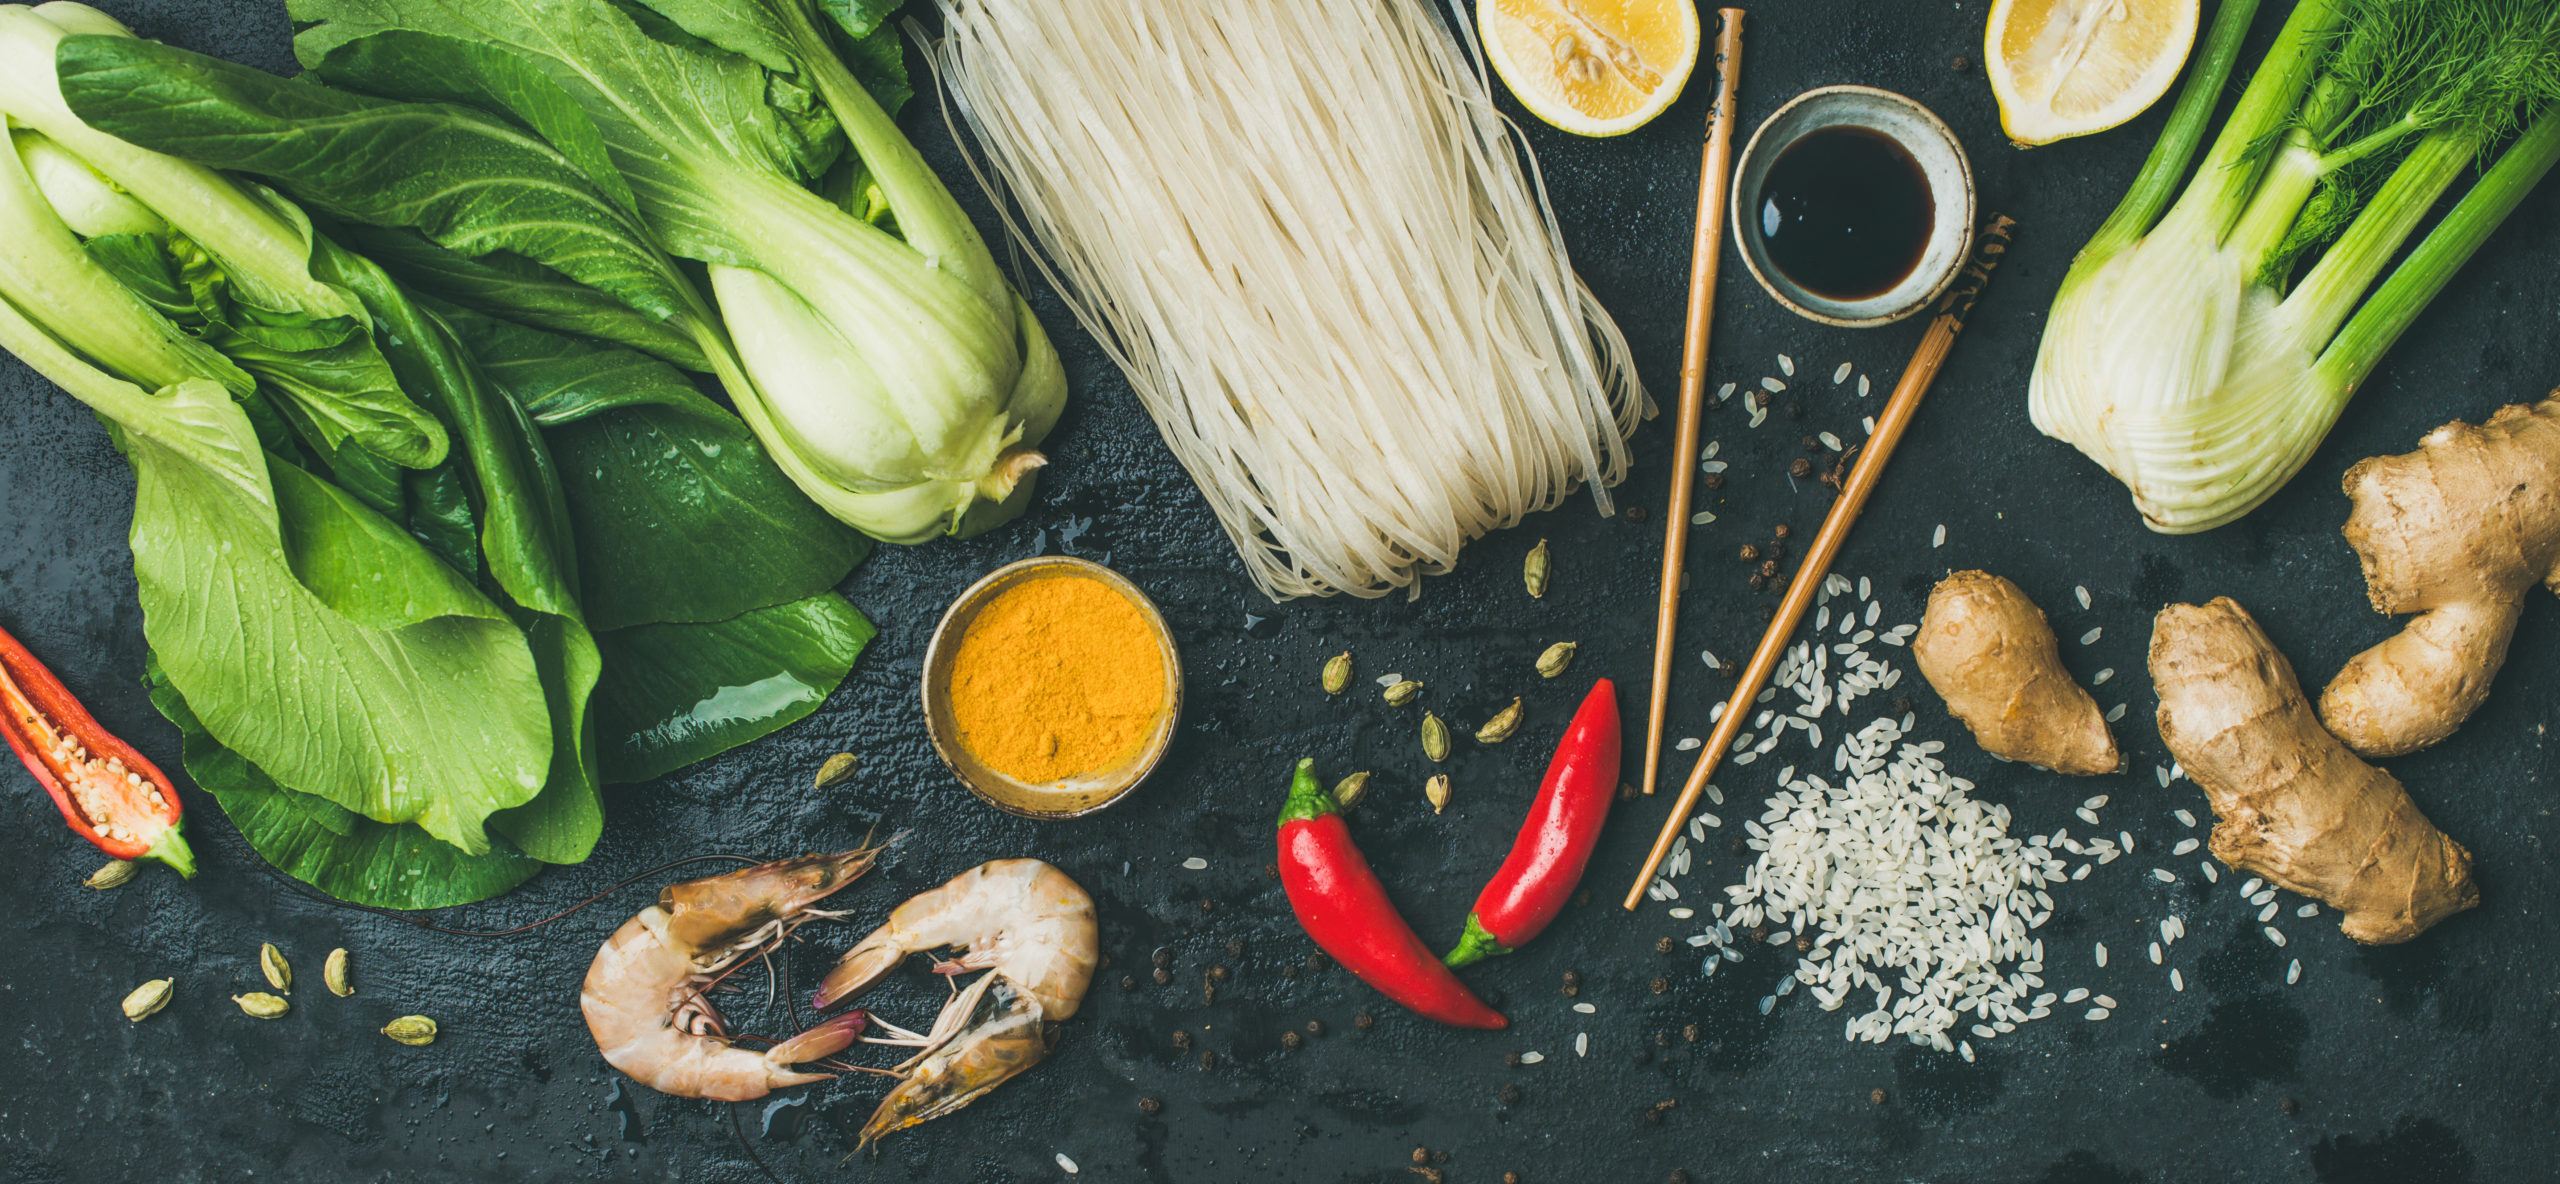 Asian cuisine ingredients over dark slate stone background, top view. Vegetables, spices, shrimp, rice, sauces for cooking vietnamese, thai or chinese food. Clean eating food concept